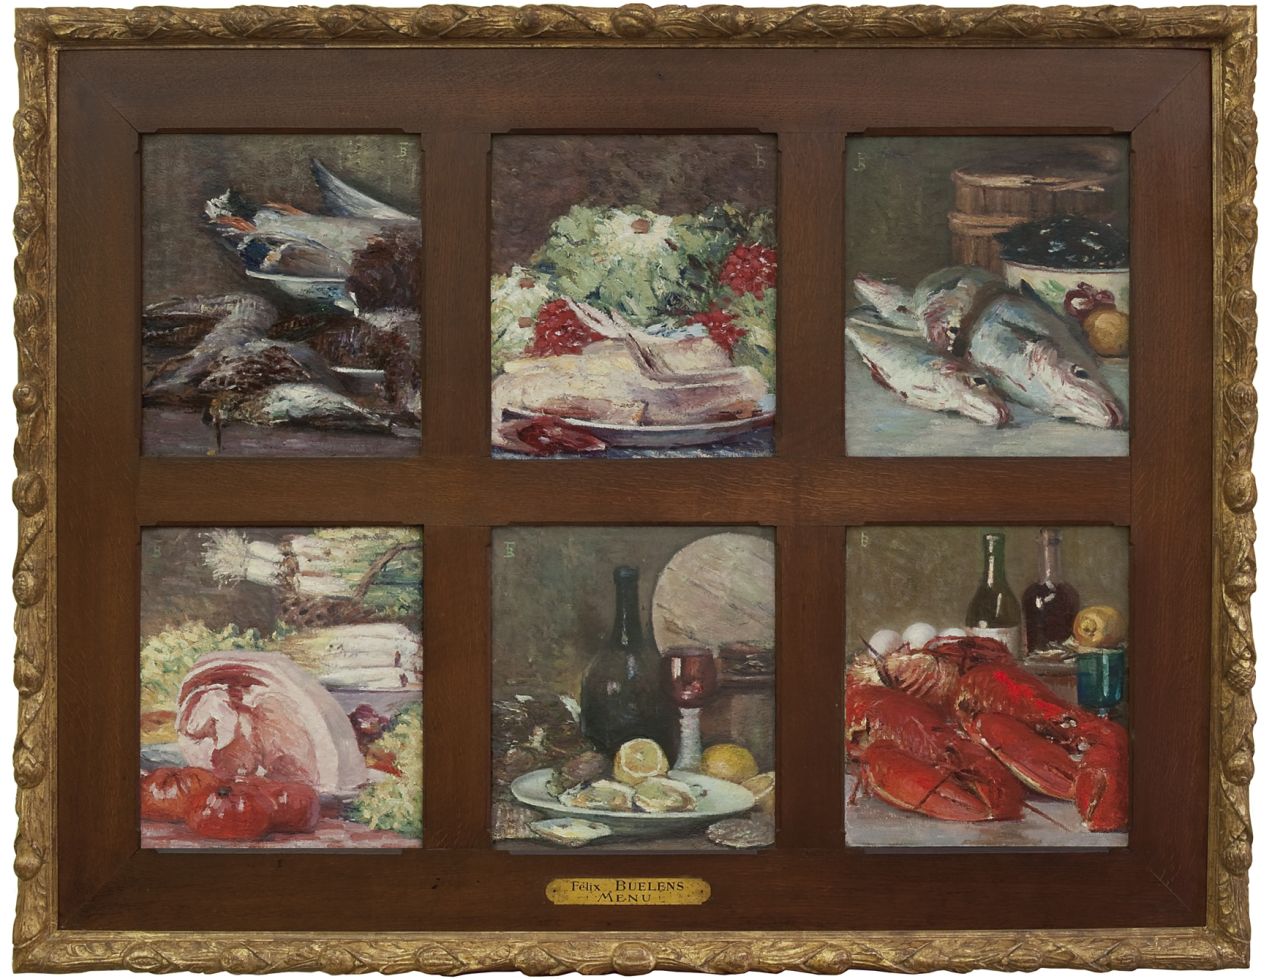 Félix Buelens | Menu - six paintings in one frame, oil on canvas, 40.2 x 35.4 cm, signed u.l. or u.r. with monogram and painted ca. 1905